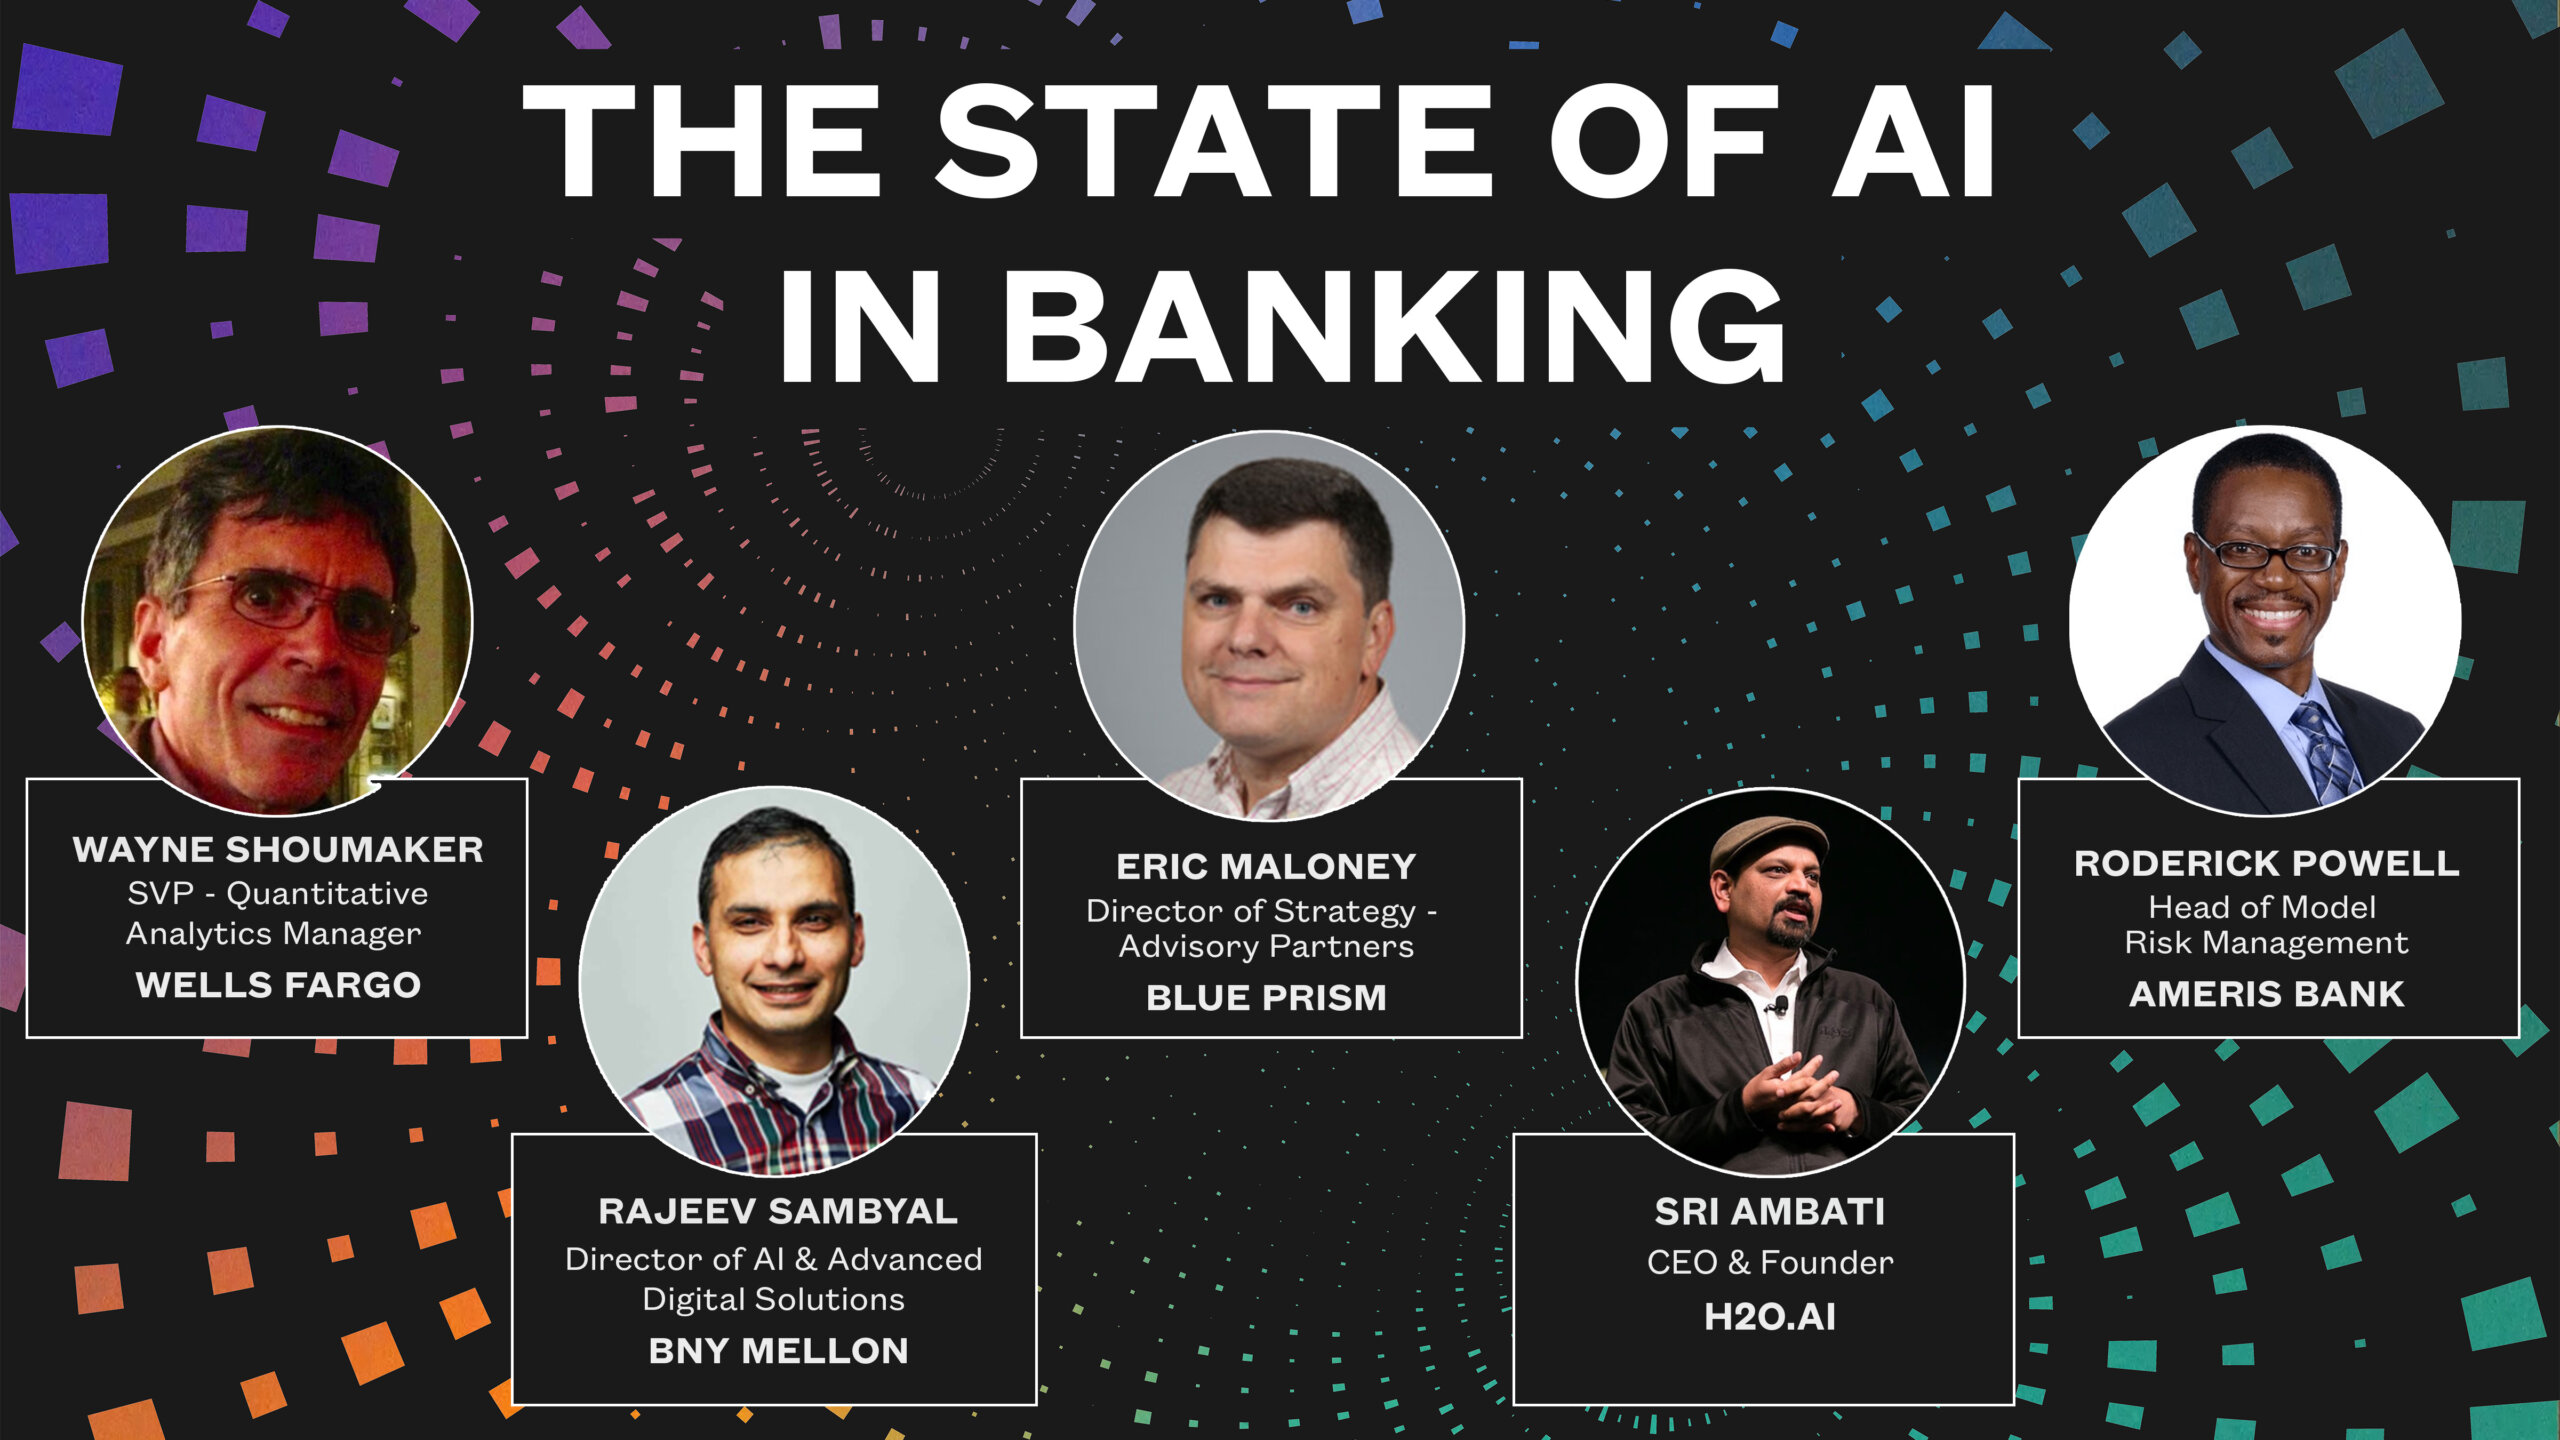 https://ai4.io/dev/blog/2020/04/21/the-state-of-ai-in-banking/